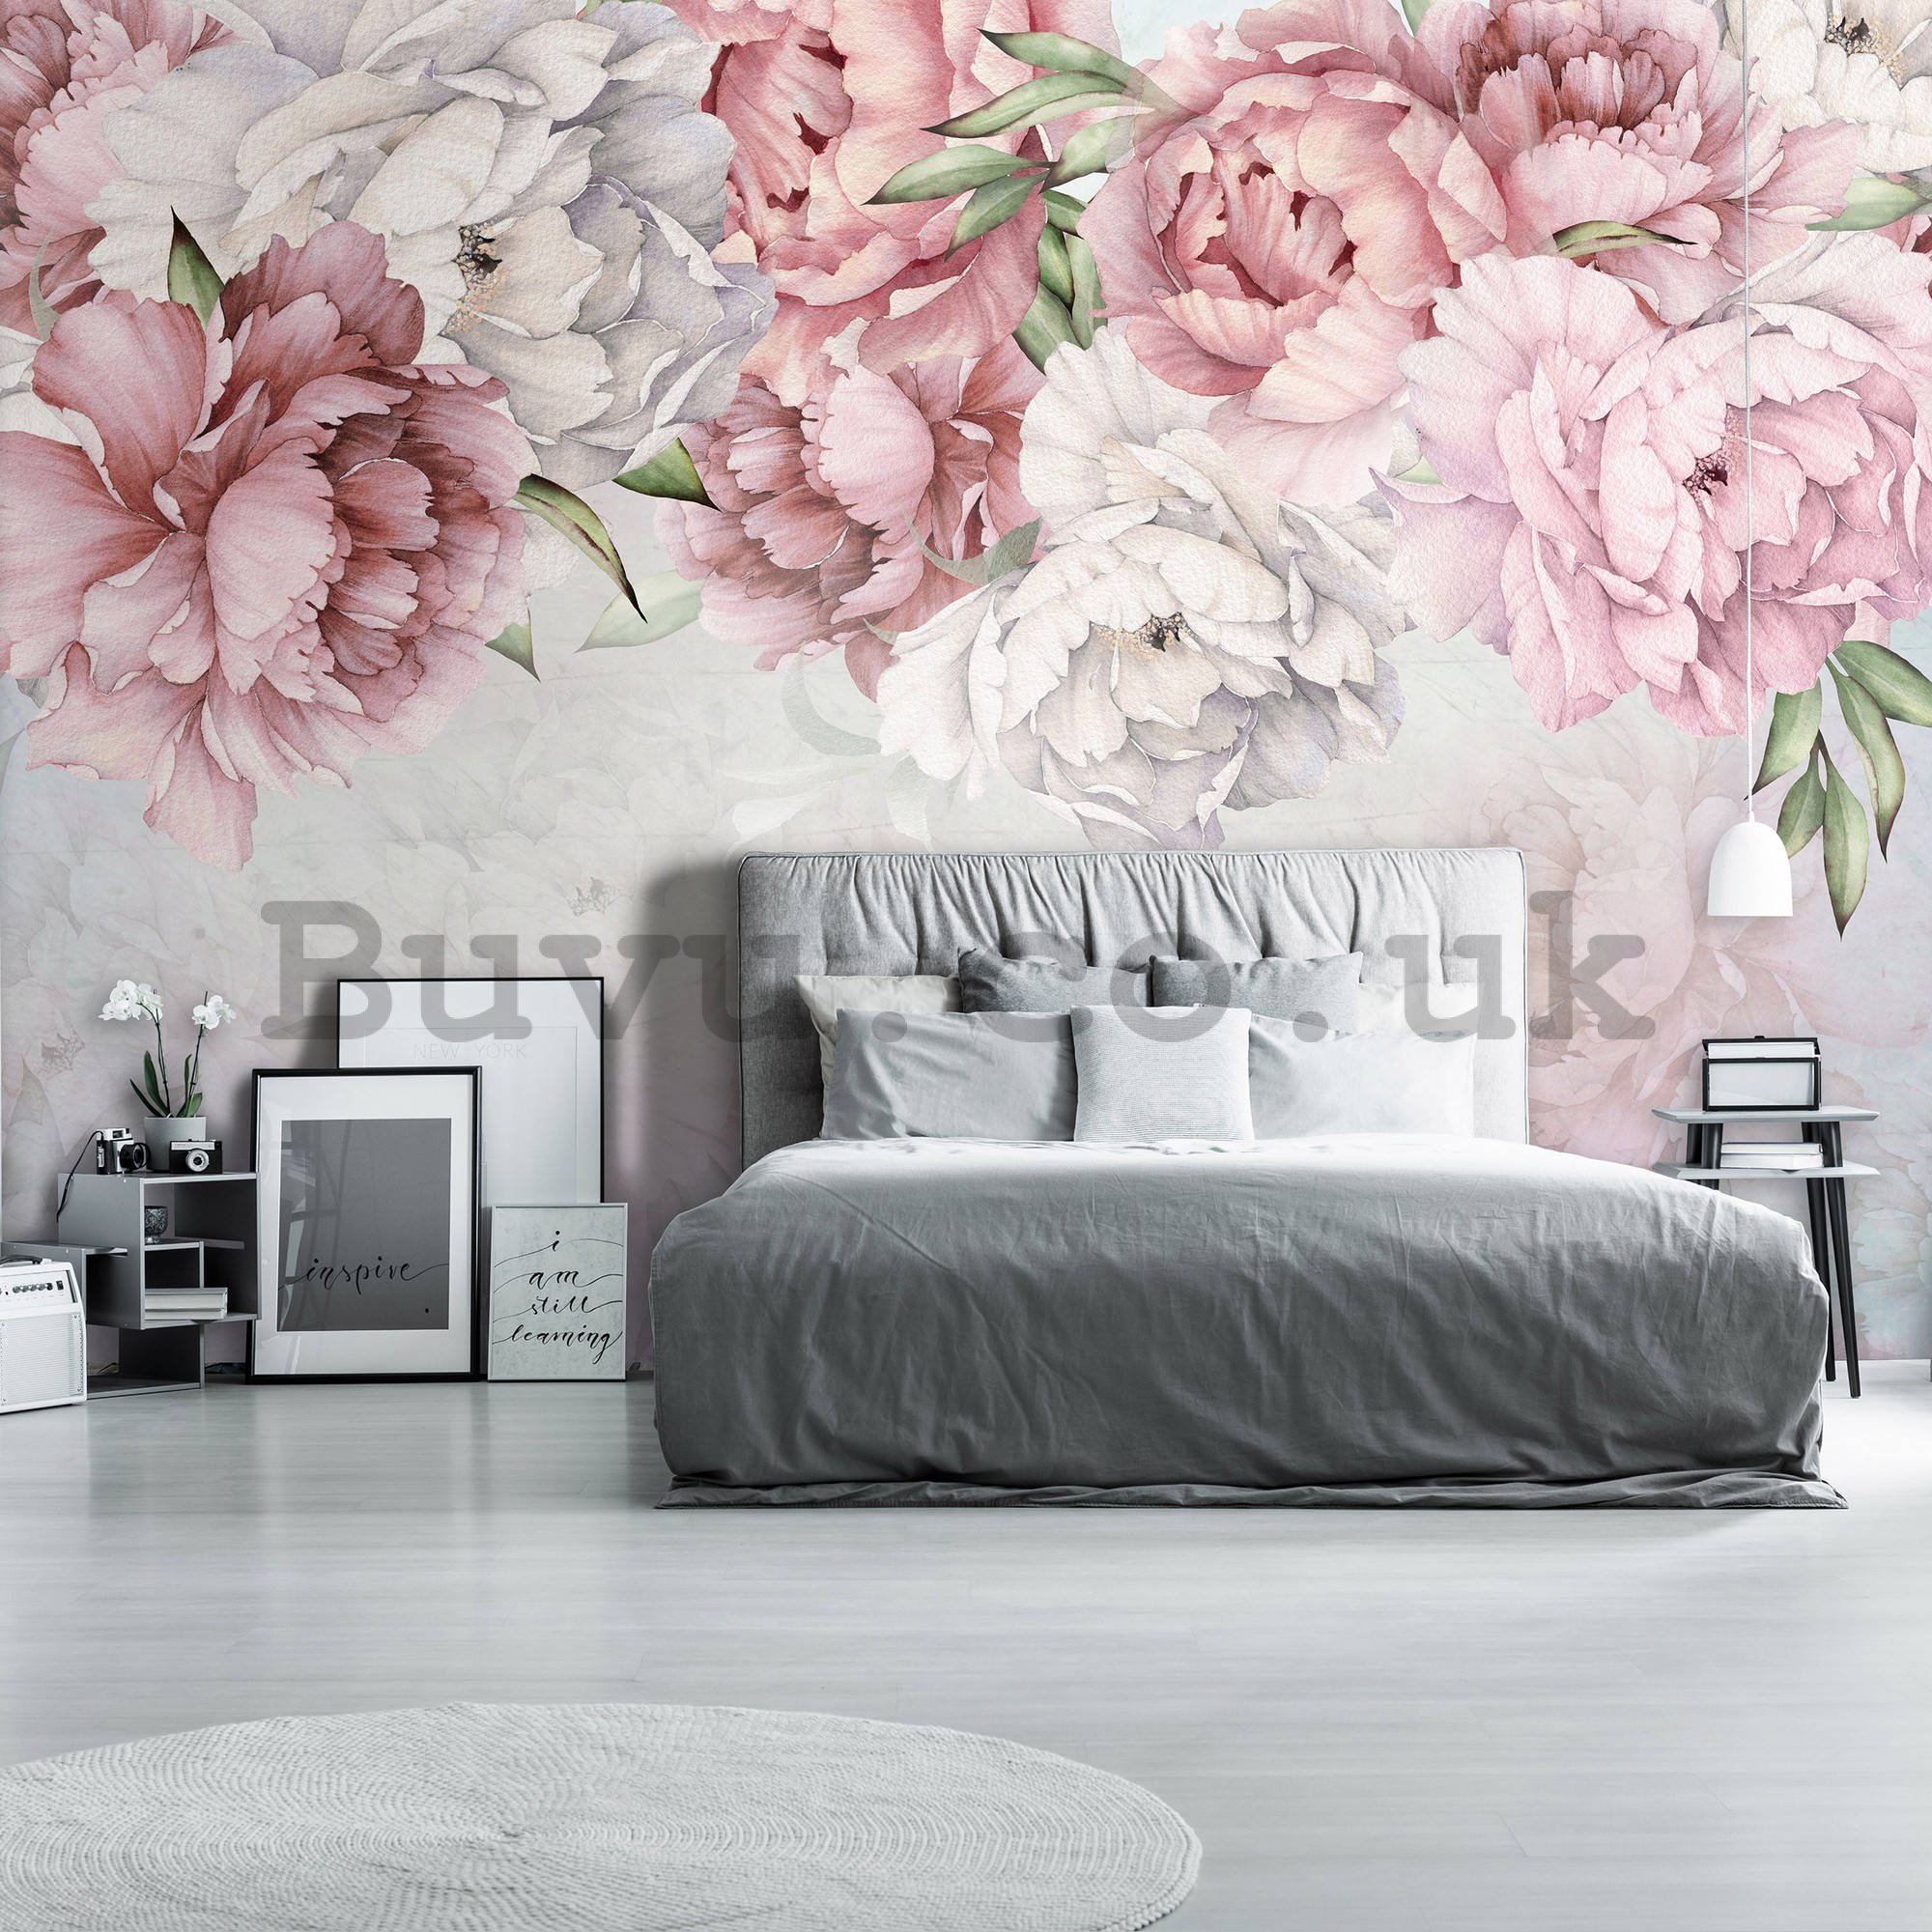 Wall mural vlies: White and pink roses - 416x254 cm